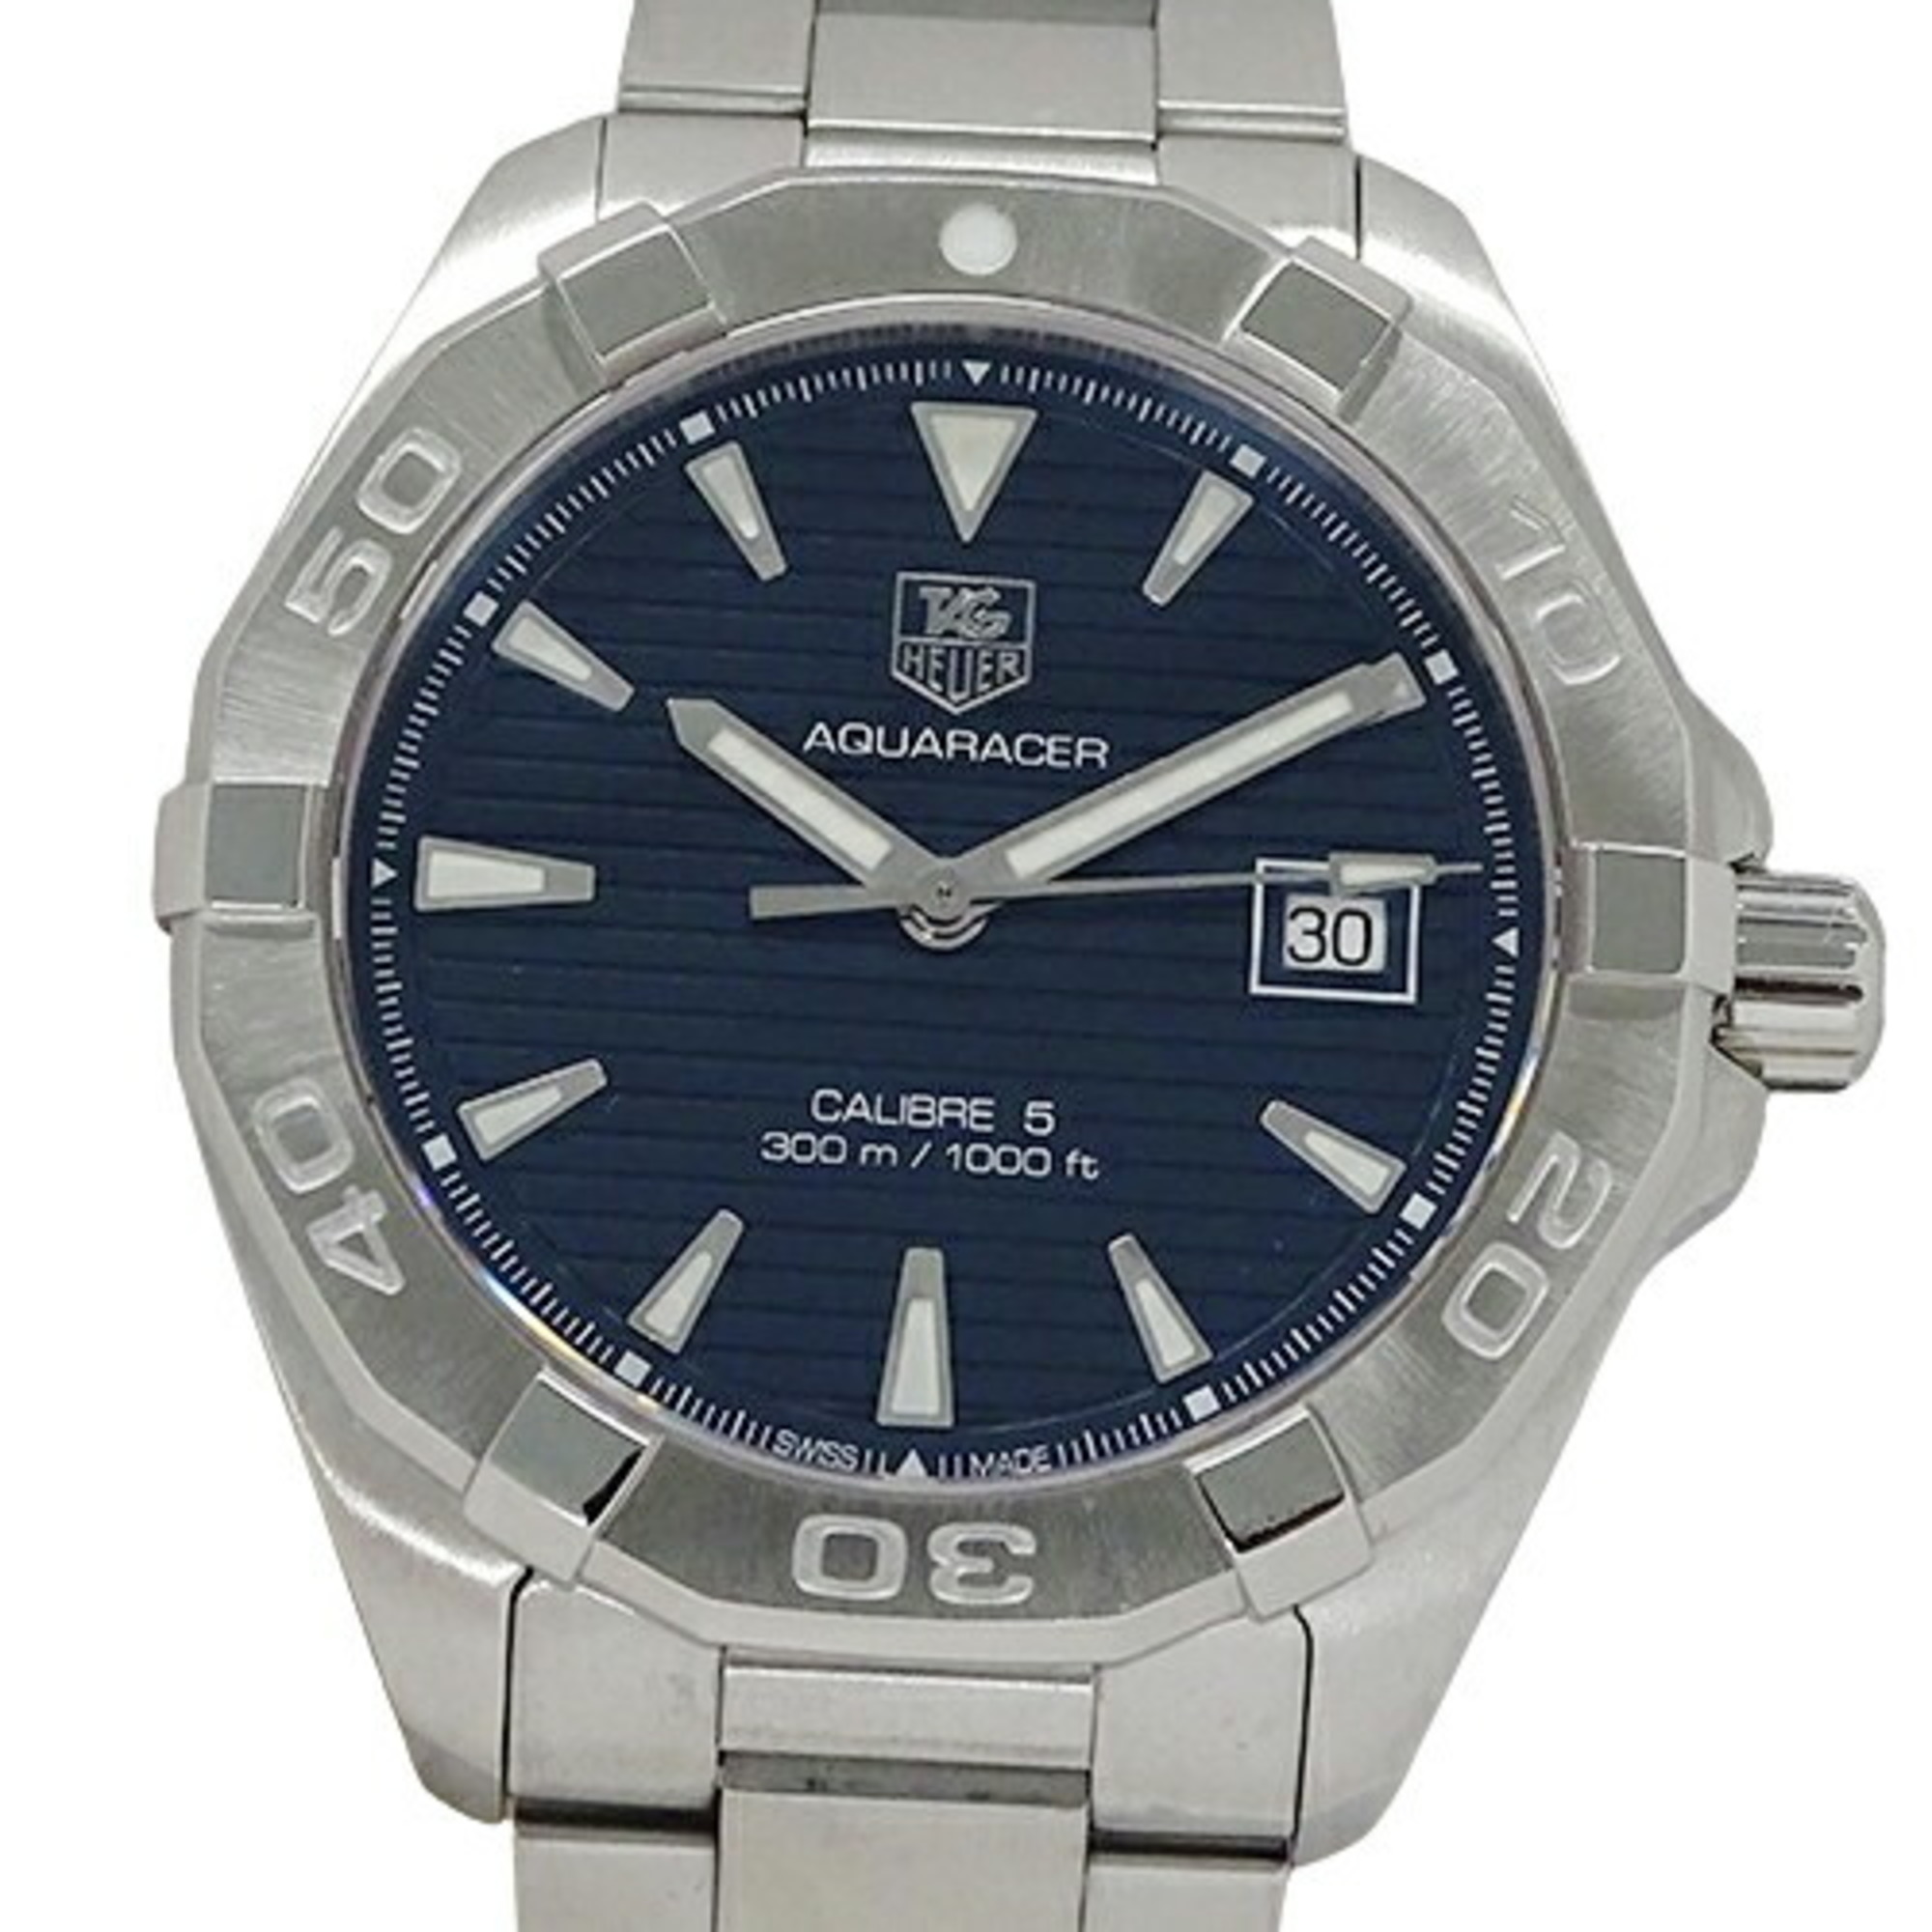 TAG Heuer Aquaracer WAY2112 BA0928 Watch Men's Caliber 5 300m Date Automatic Winding AT Stainless Steel SS Silver Blue Polished